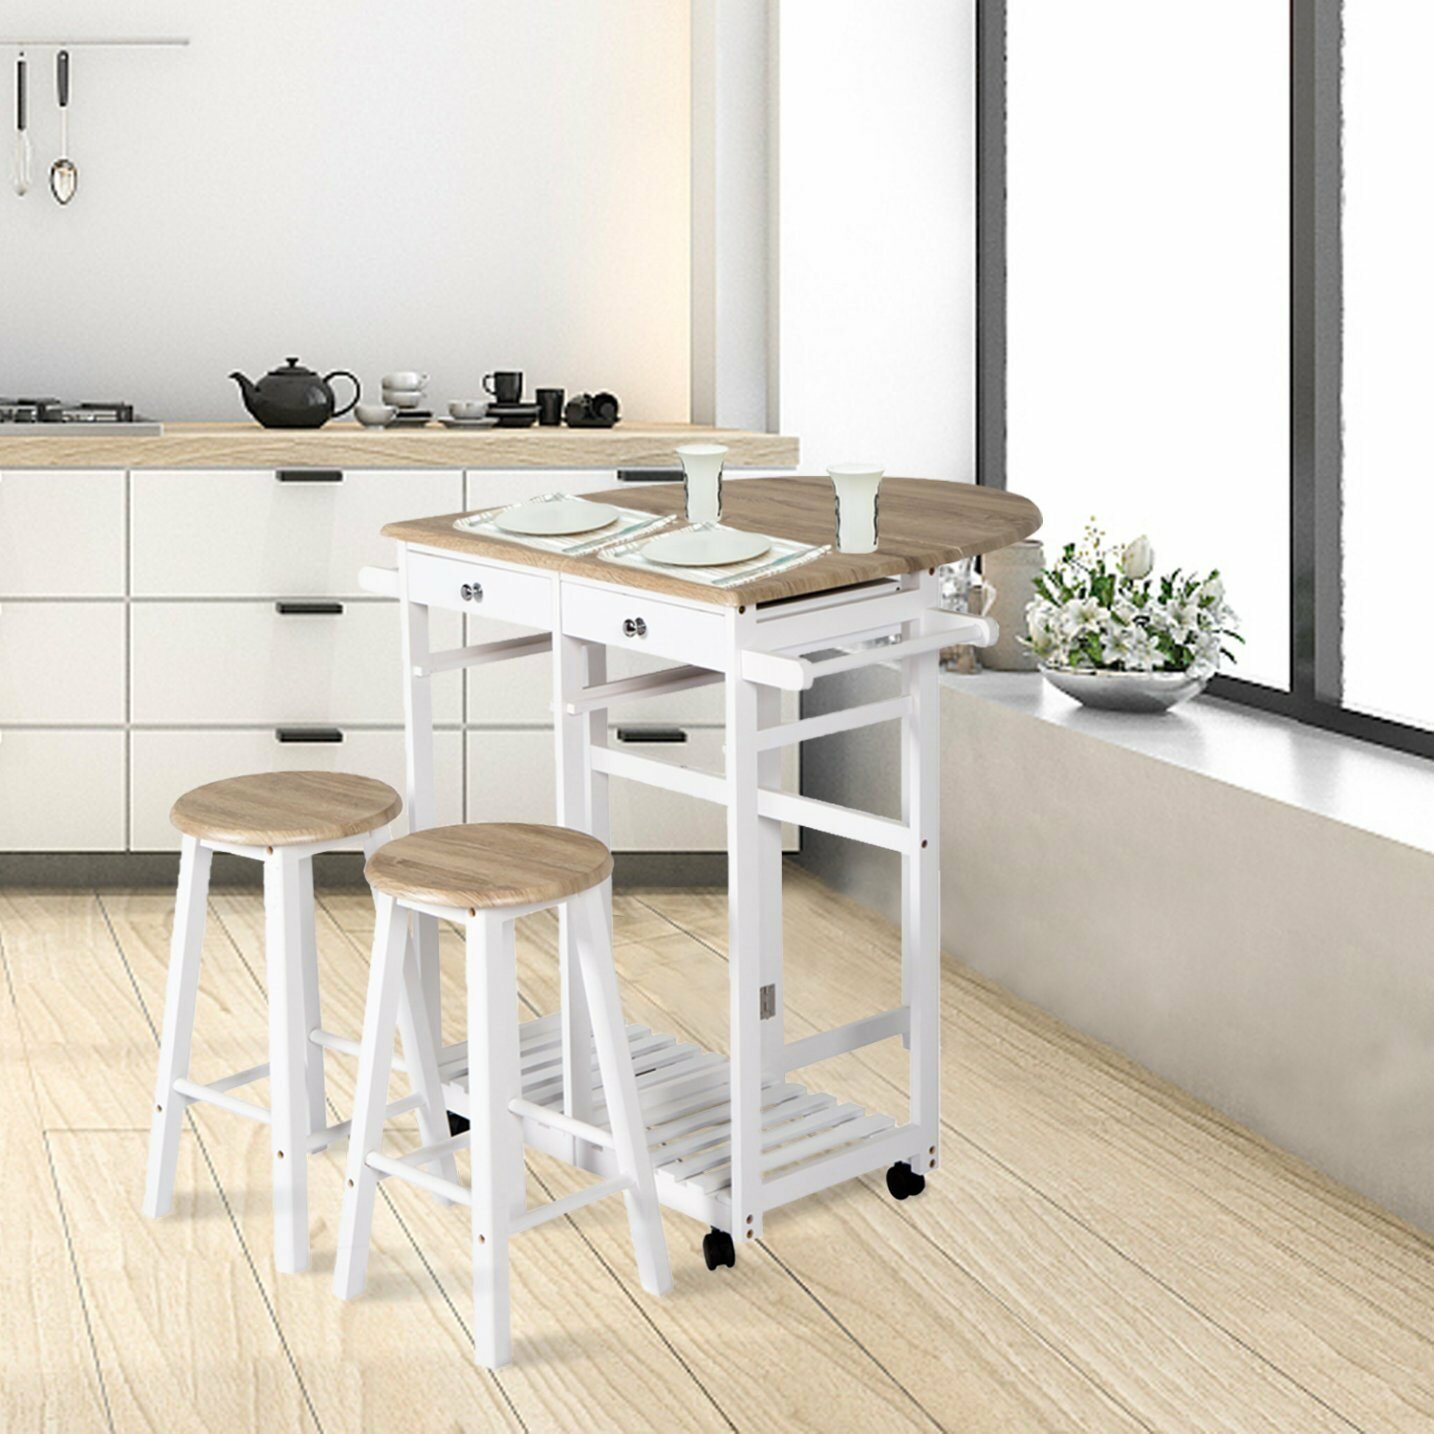 White /& Wood Color Multi-Purpose Wood Rolling Wood Kitchen Island Trolley Cart Wood Top Storage Cabinet Utility